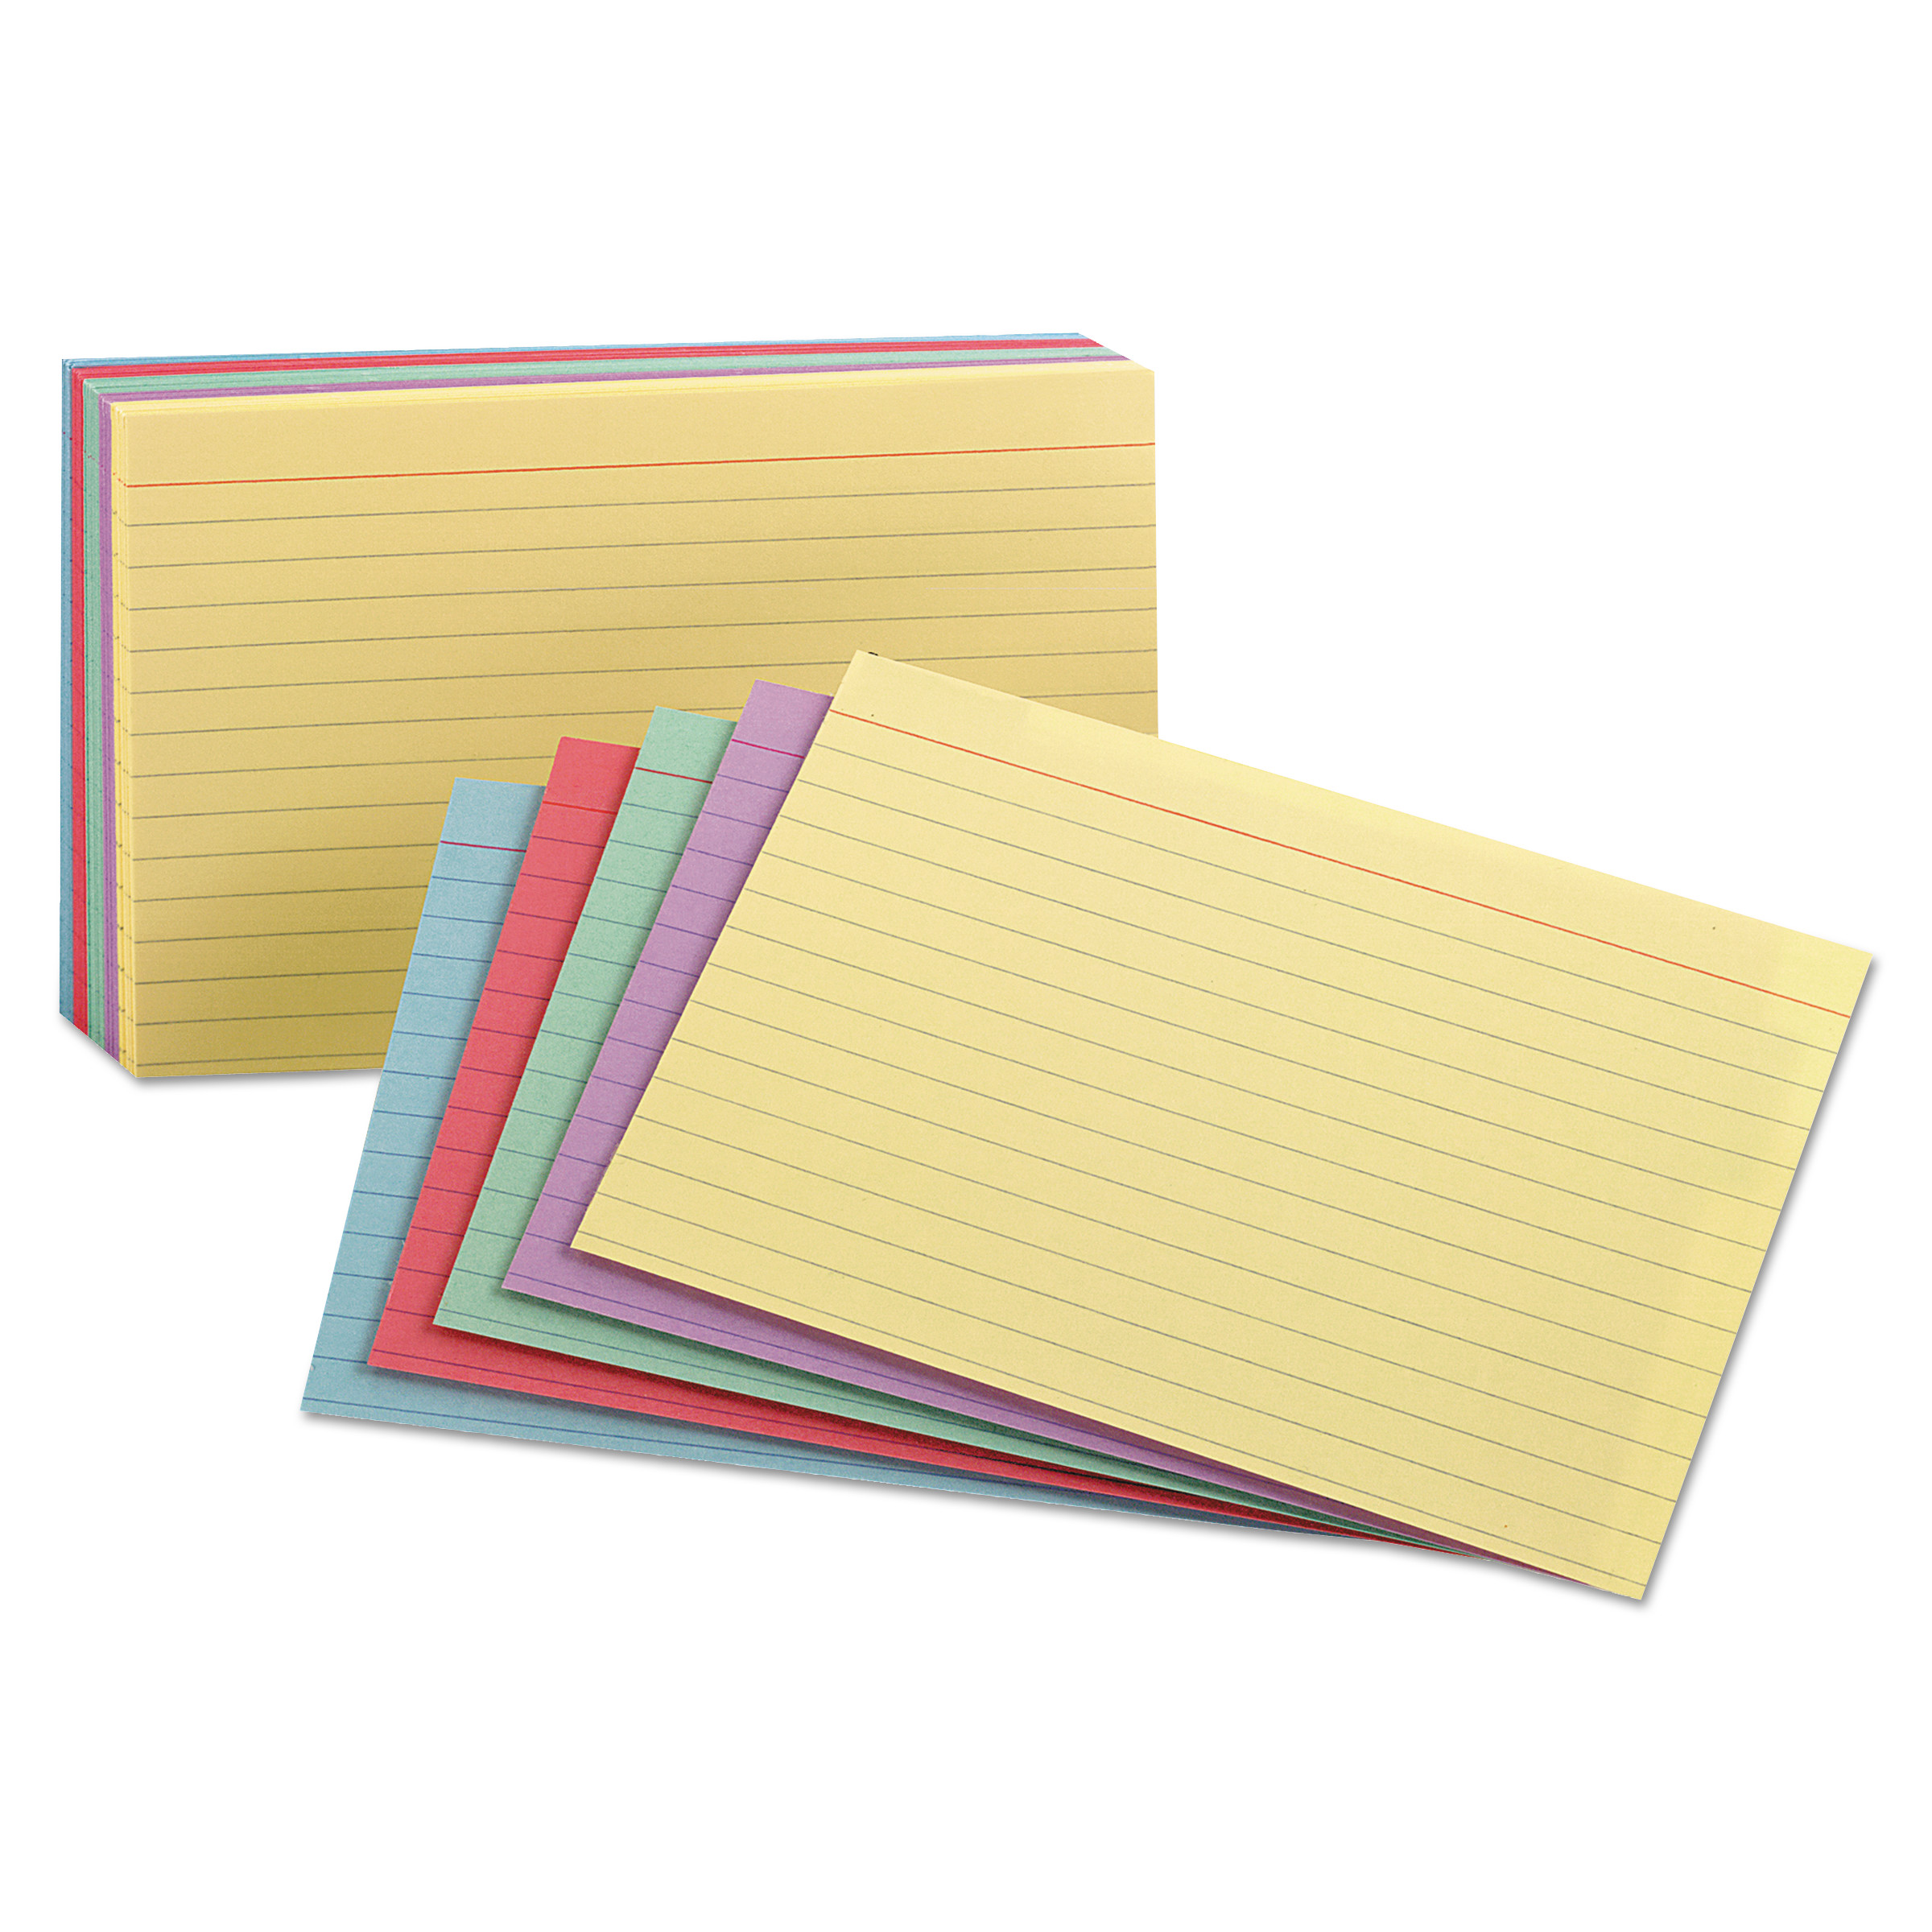  Oxford 35810 Ruled Index Cards, 5 x 8, Blue/Violet/Canary/Green/Cherry, 100/Pack (OXF35810) 